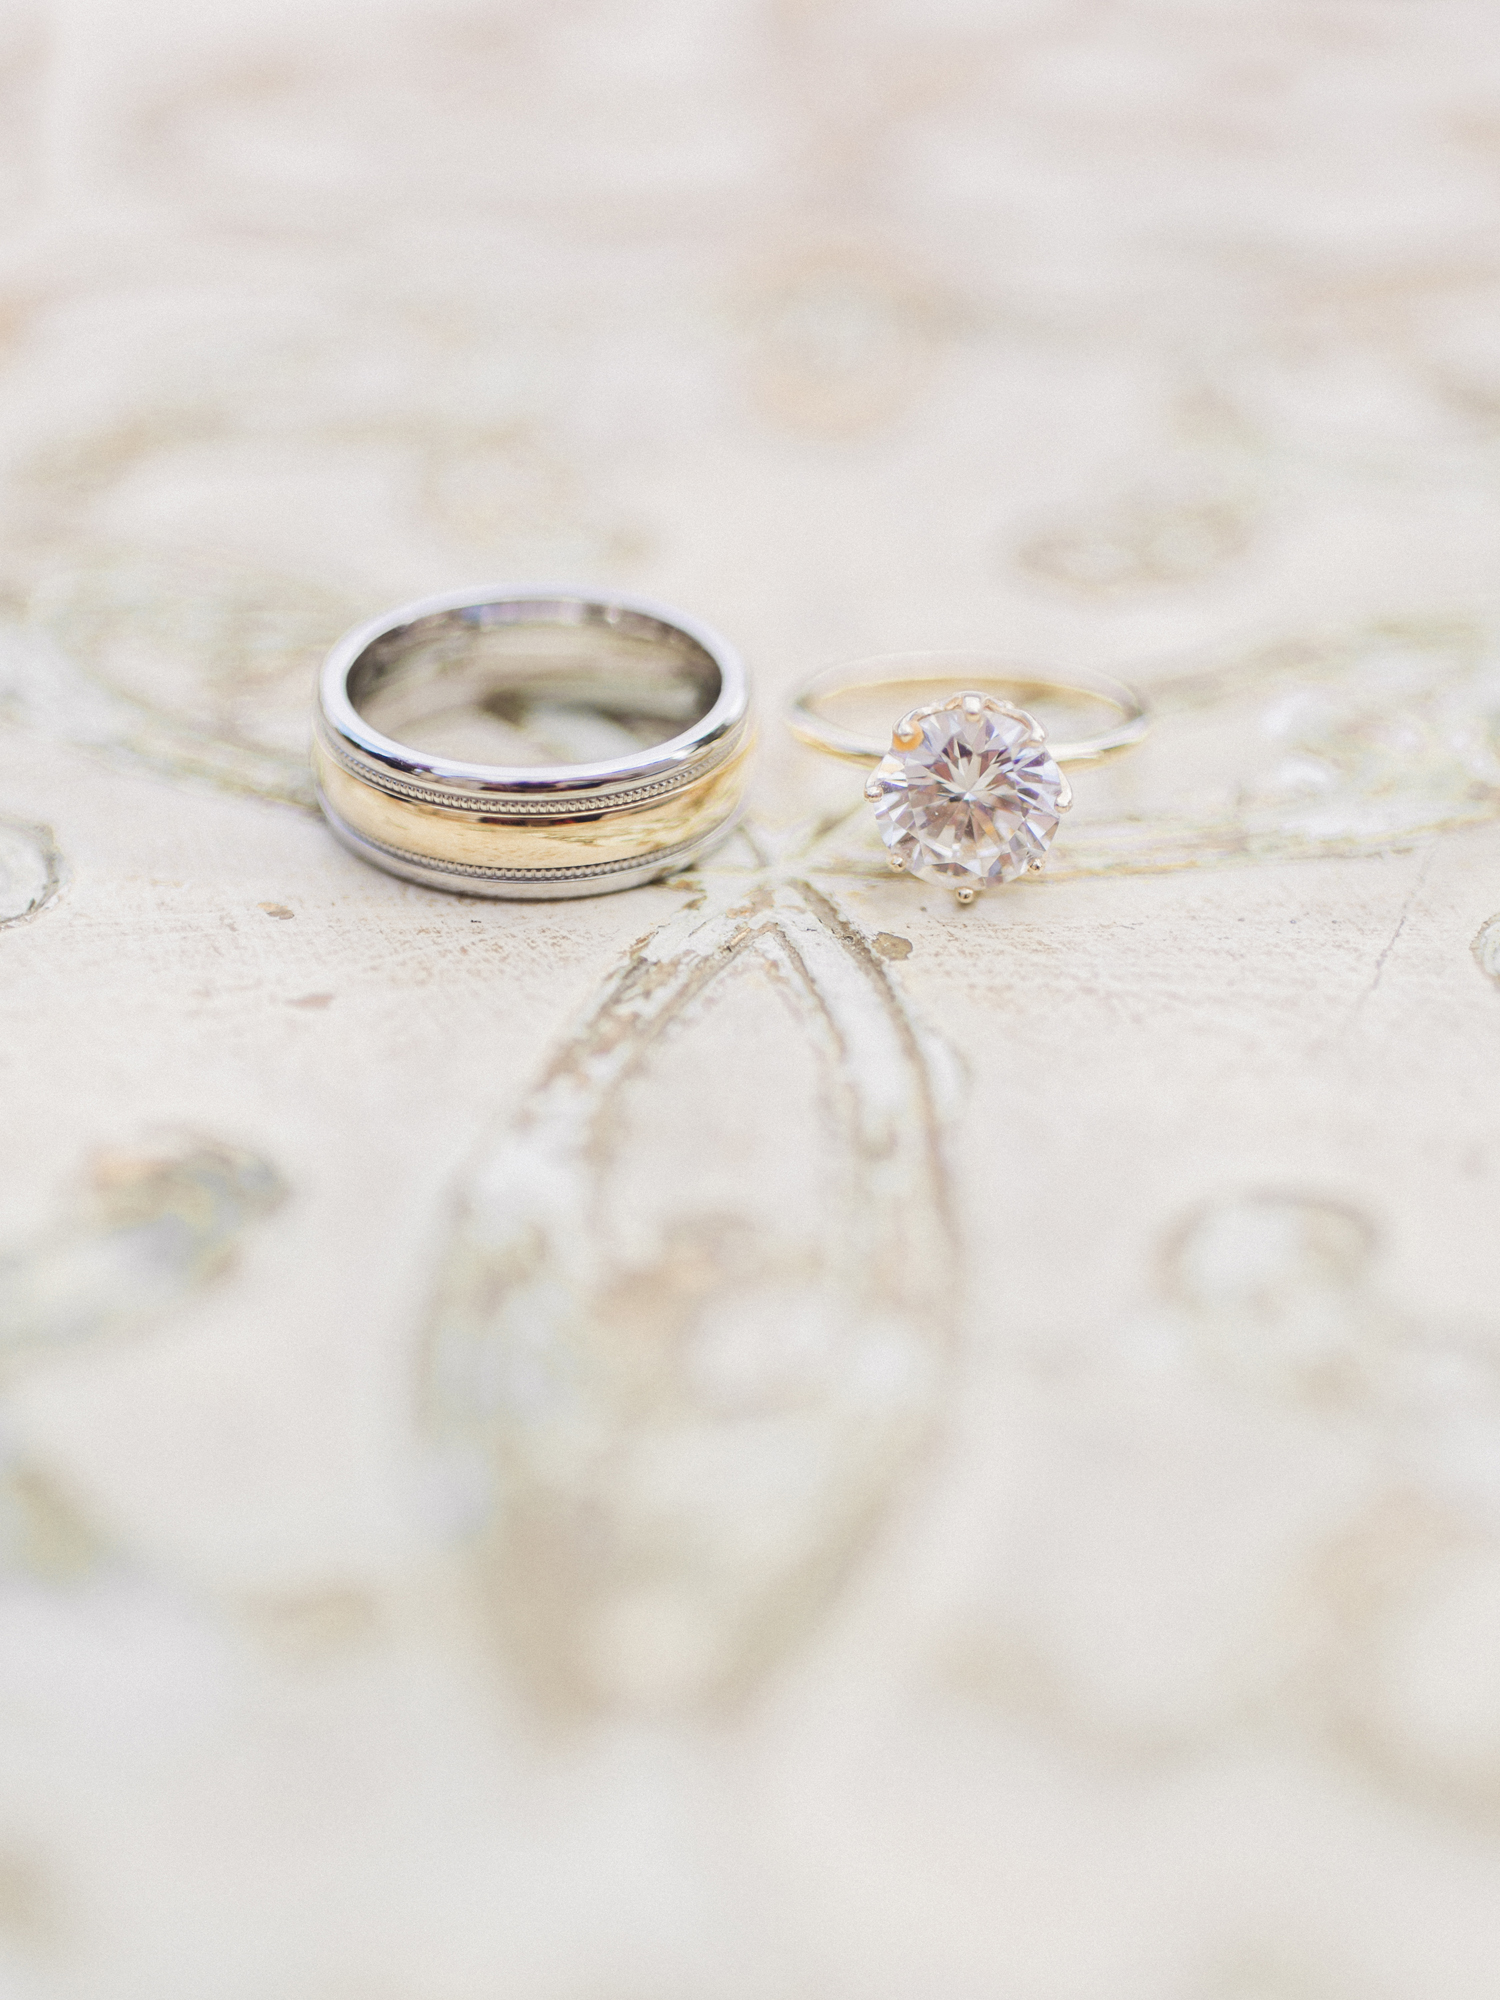 Gold solitaire engaement ring in a basket of diamonds by Lauren Priori Jewelery photographed by fine art wedding photographer Love Tree Studios in St. Louis Missouri.